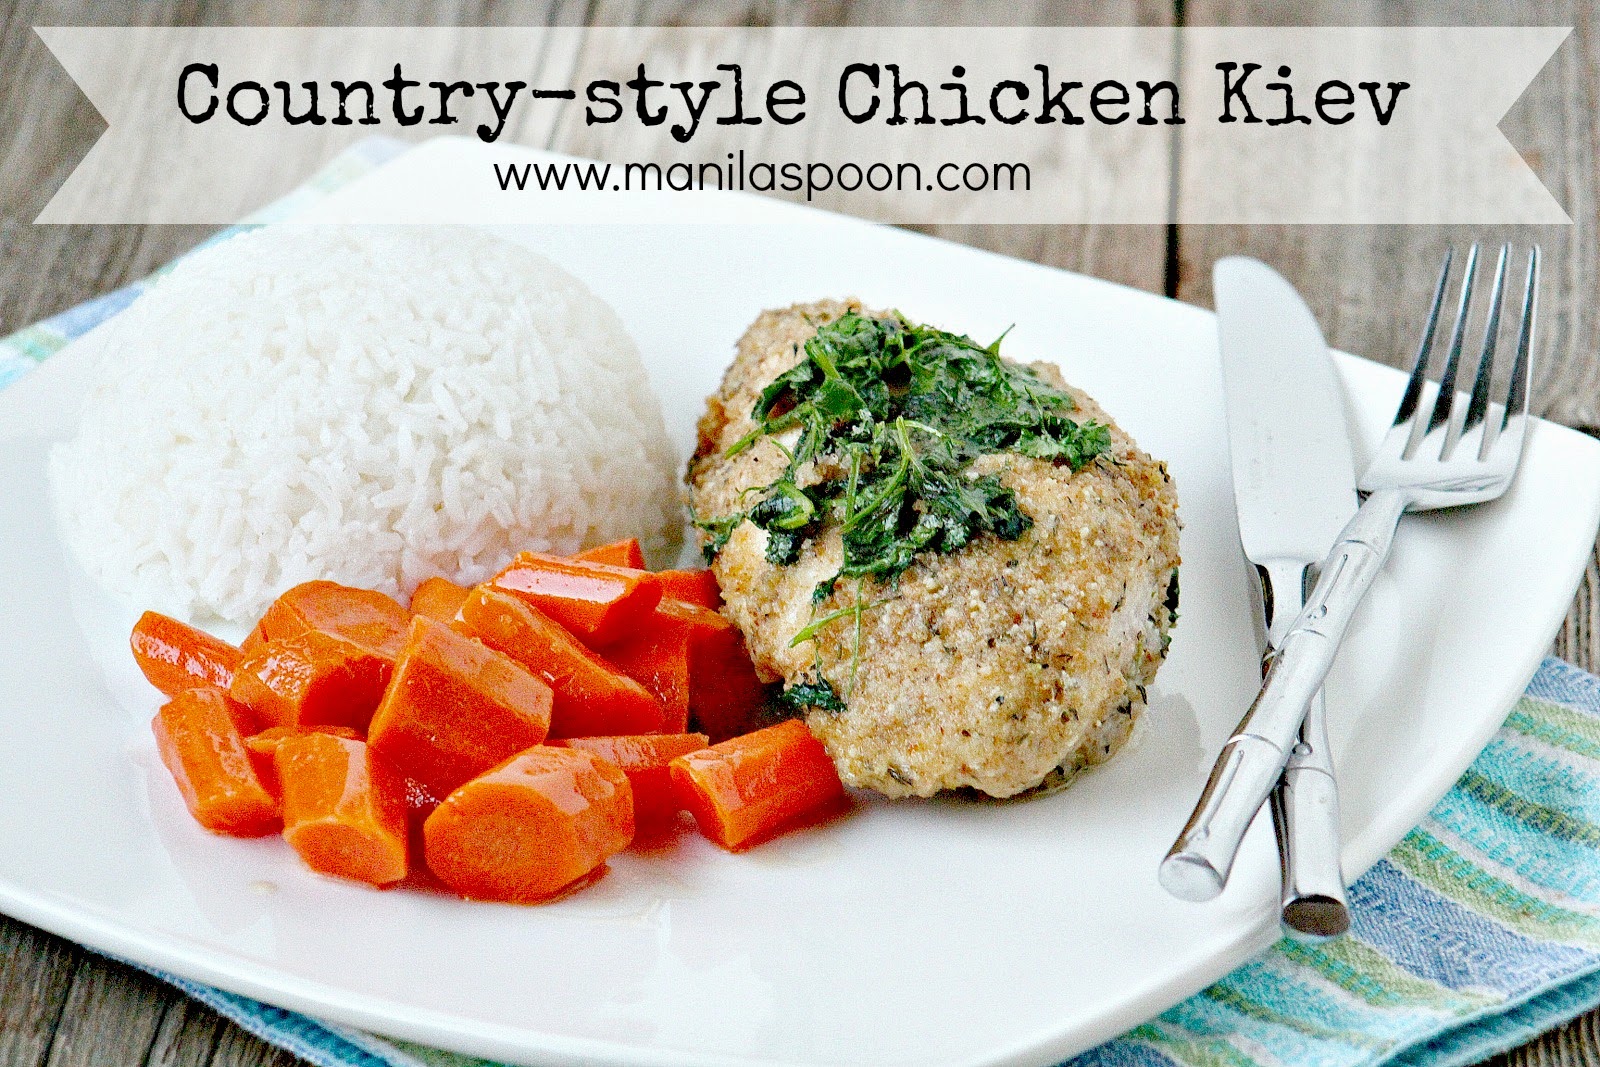 Tried and tested recipe for a delicious and super easy dish - Country-Style Chicken Kiev! The chicken comes out so tender and moist and perfectly seasoned. A must for busy weeknight dinner. #countrystyle #chickenkiev #chicken #dinner 